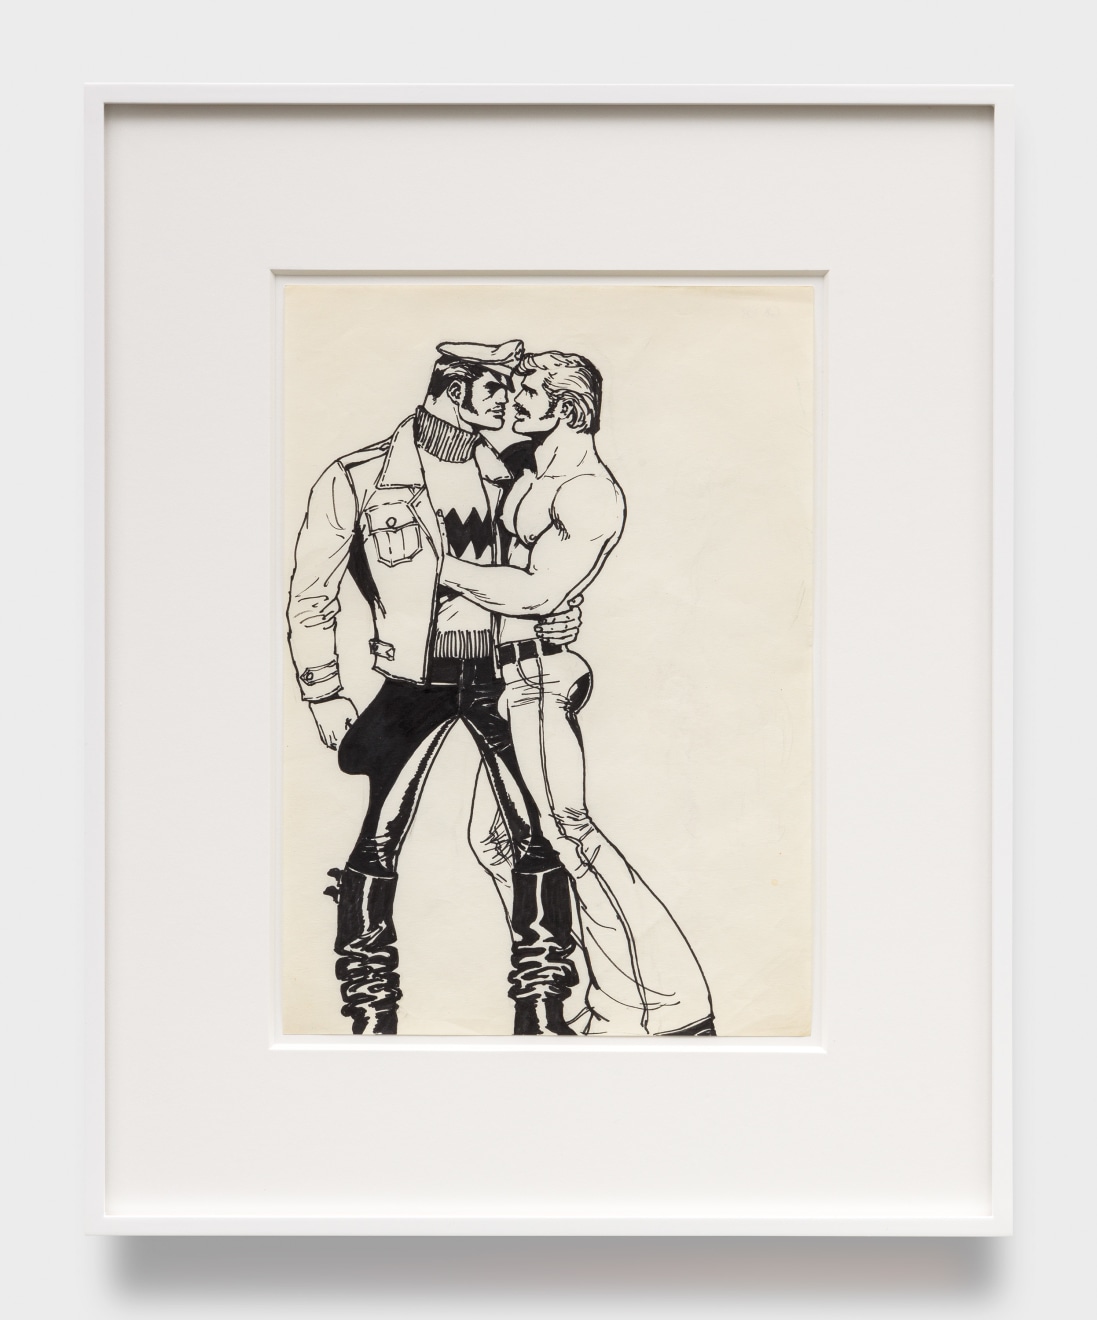 Tom of Finland, Untitled, 1968